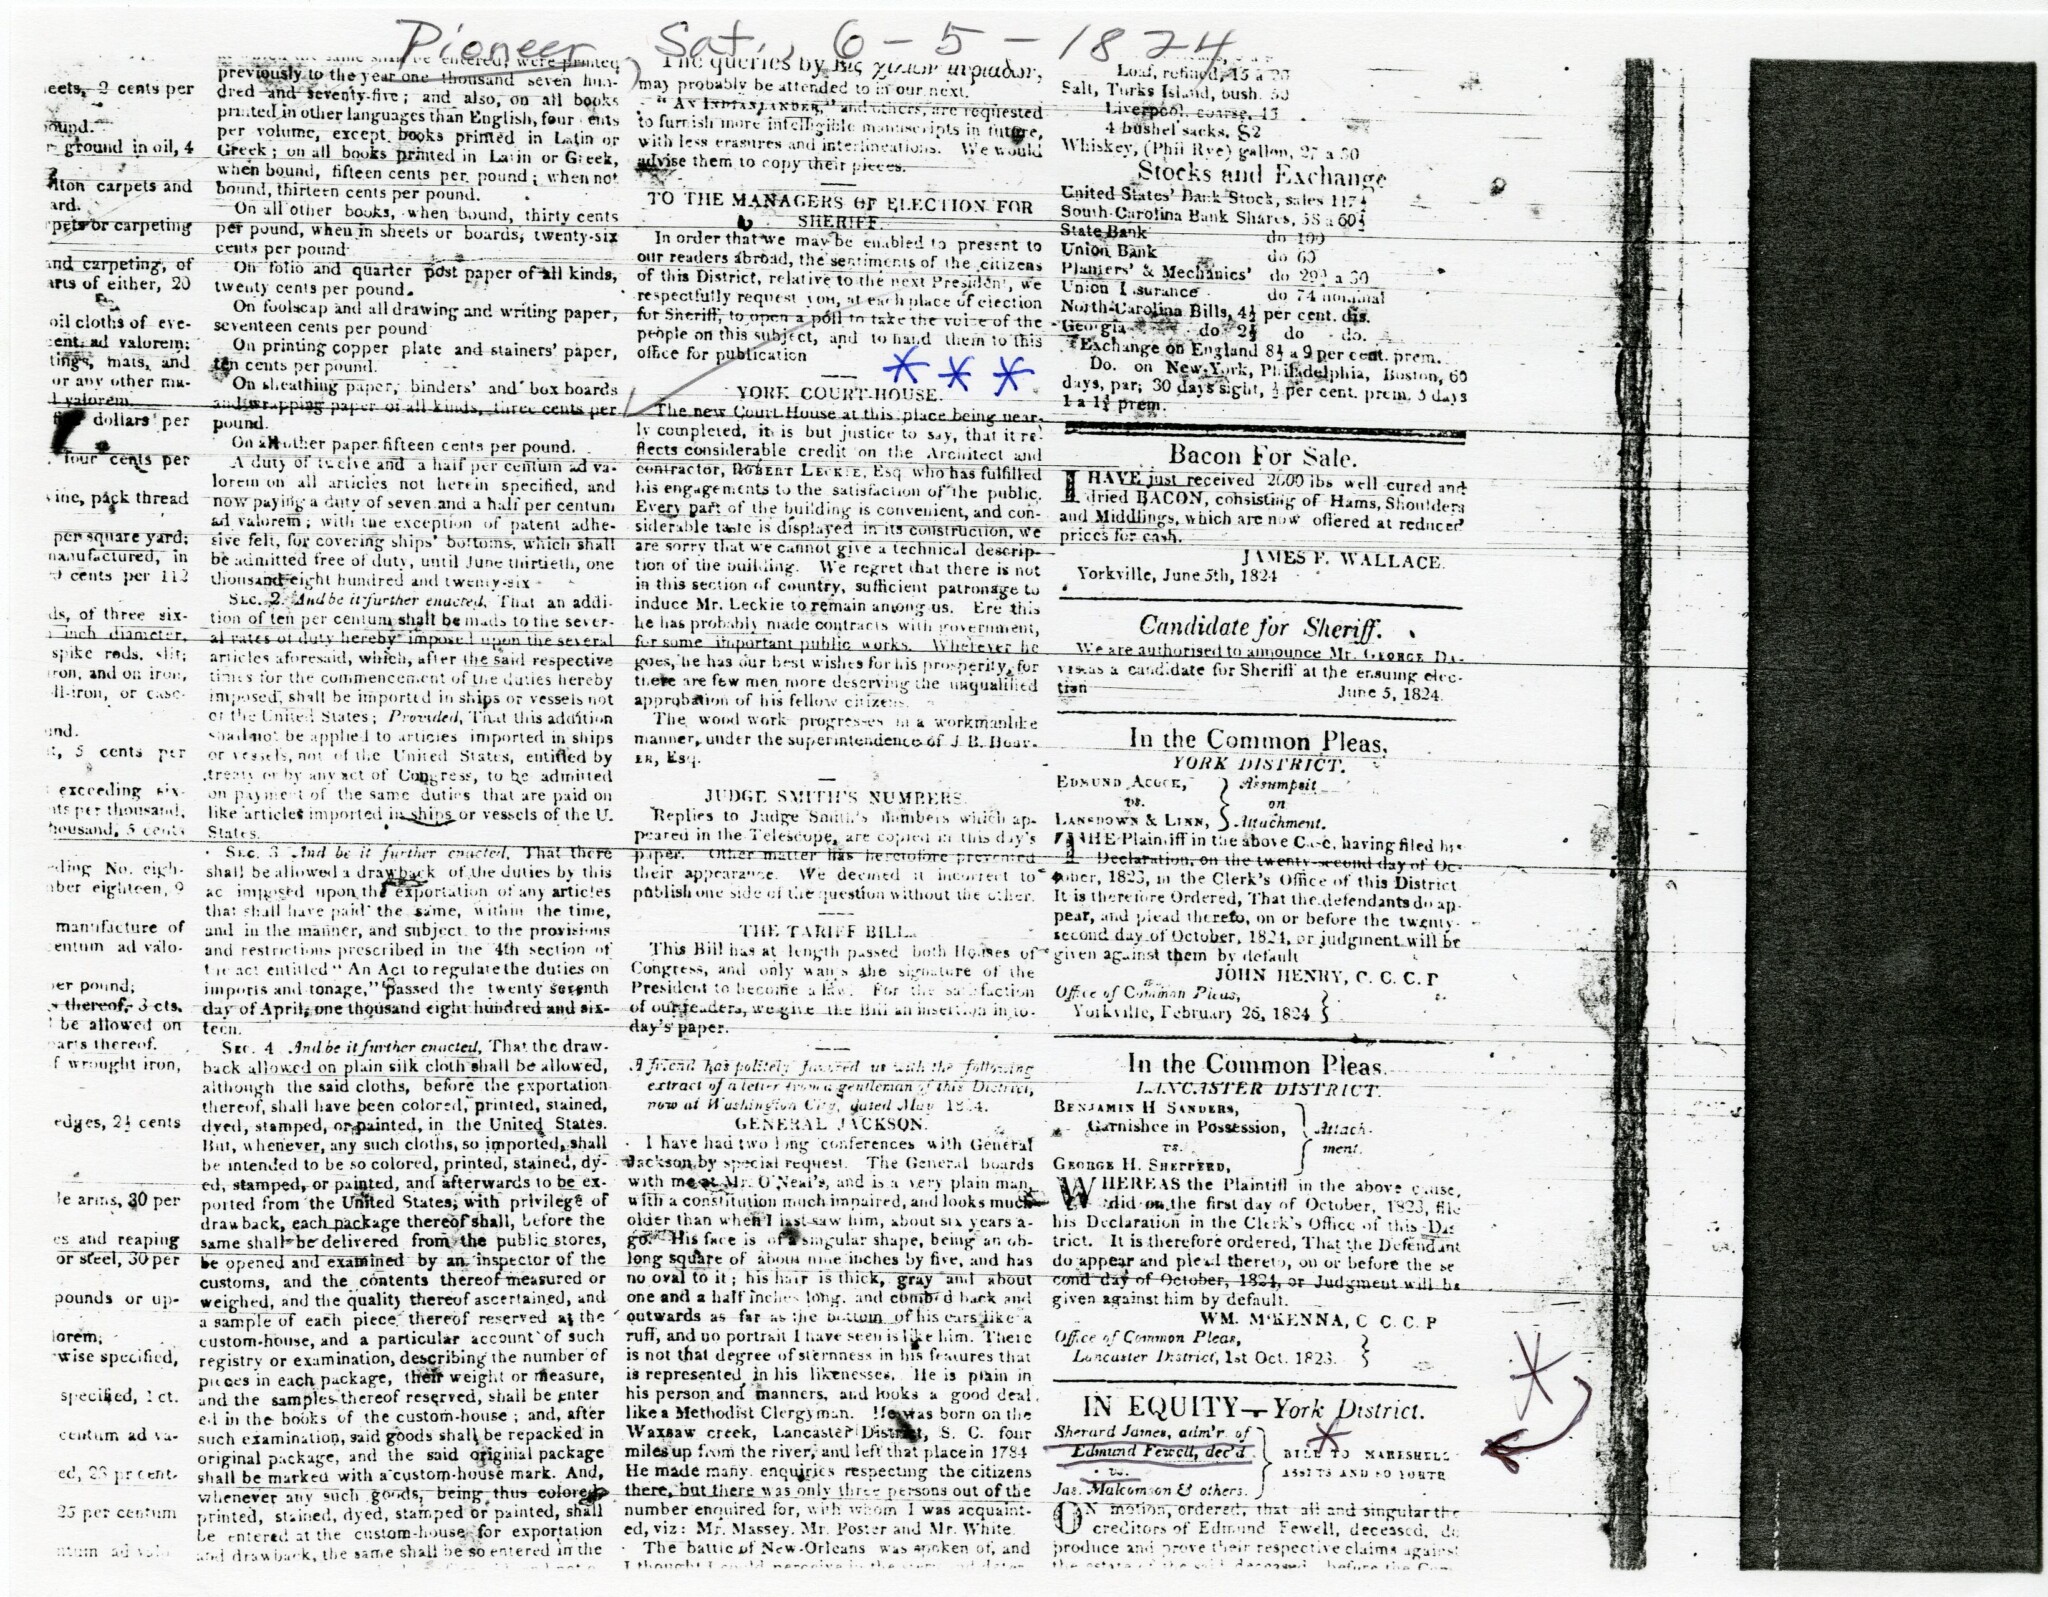 1824 NEWSPAPER ARTICLE ON NEW COURTHOUSE AND ROBERT LECKIE - CONTRACTOR